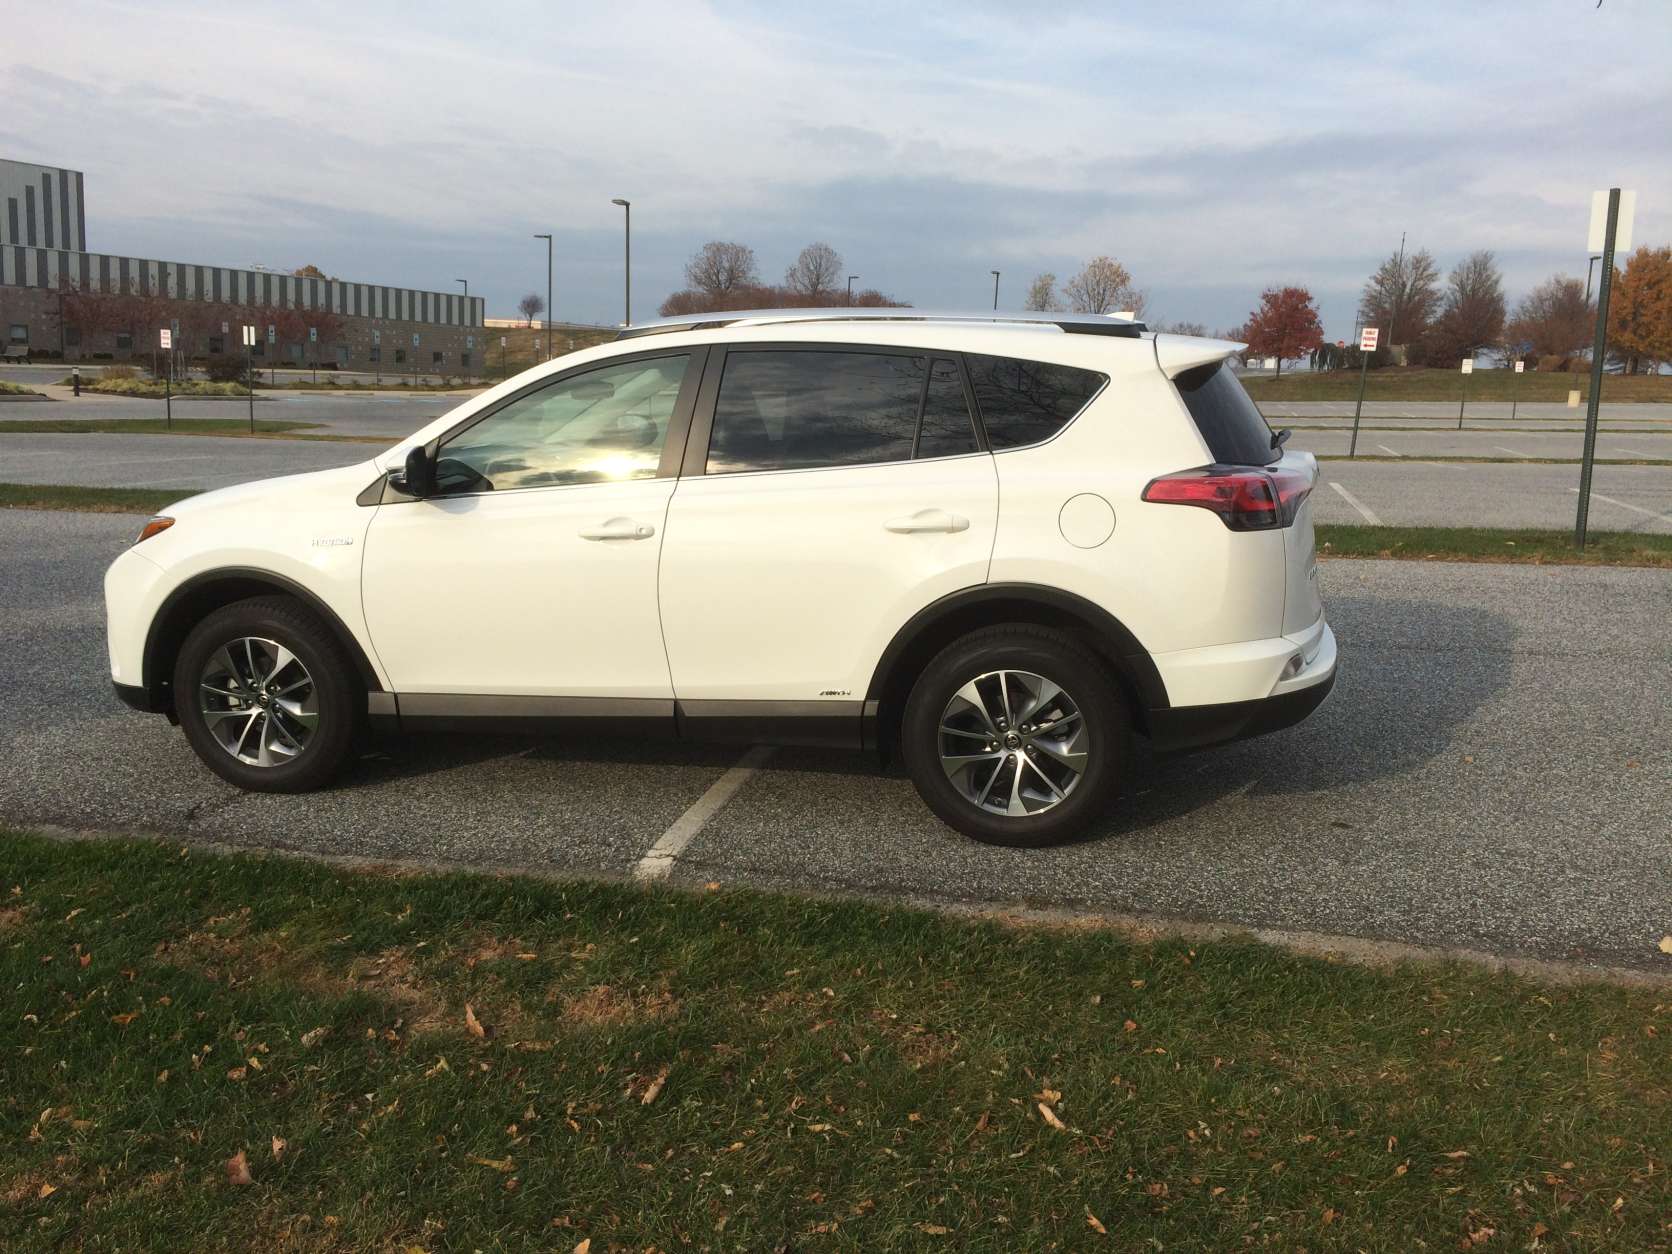 The RAV4 Hybrid uses a CVT transmission instead of the normal automatic in the gas version of the RAV4. (WTOP/Mike Parris)